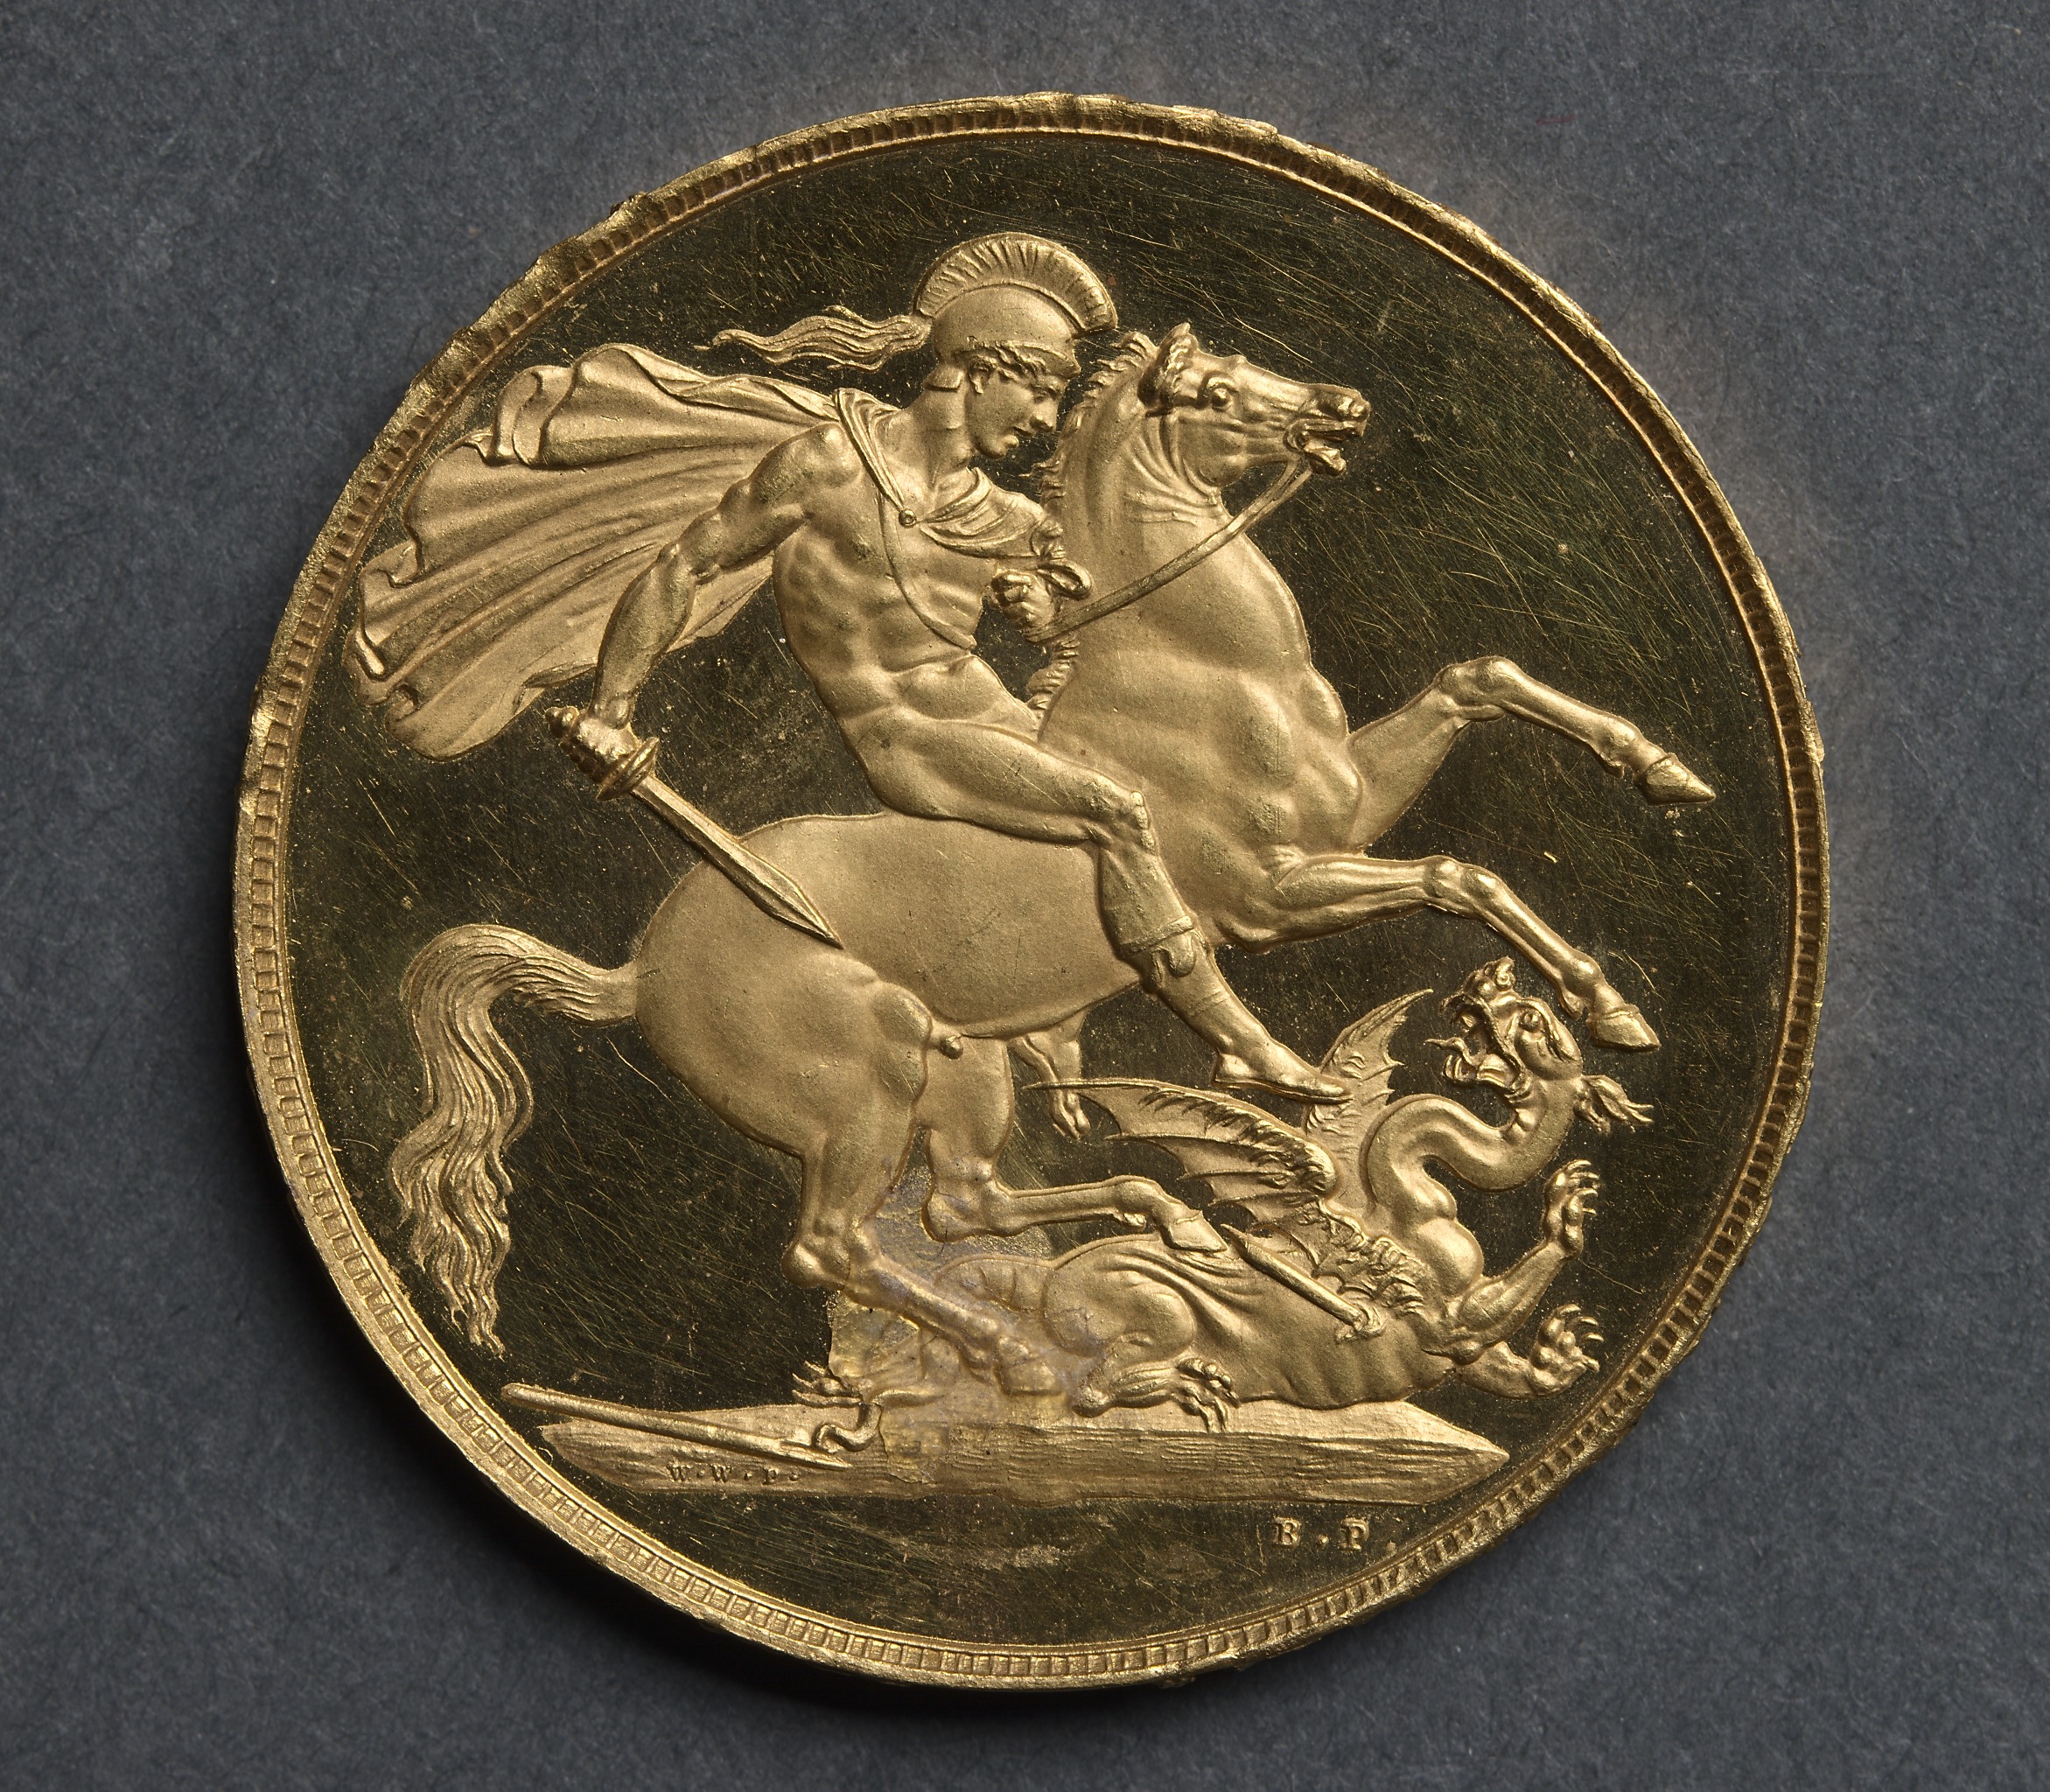 Two Pound Piece: St. George and the Dragon (reverse)